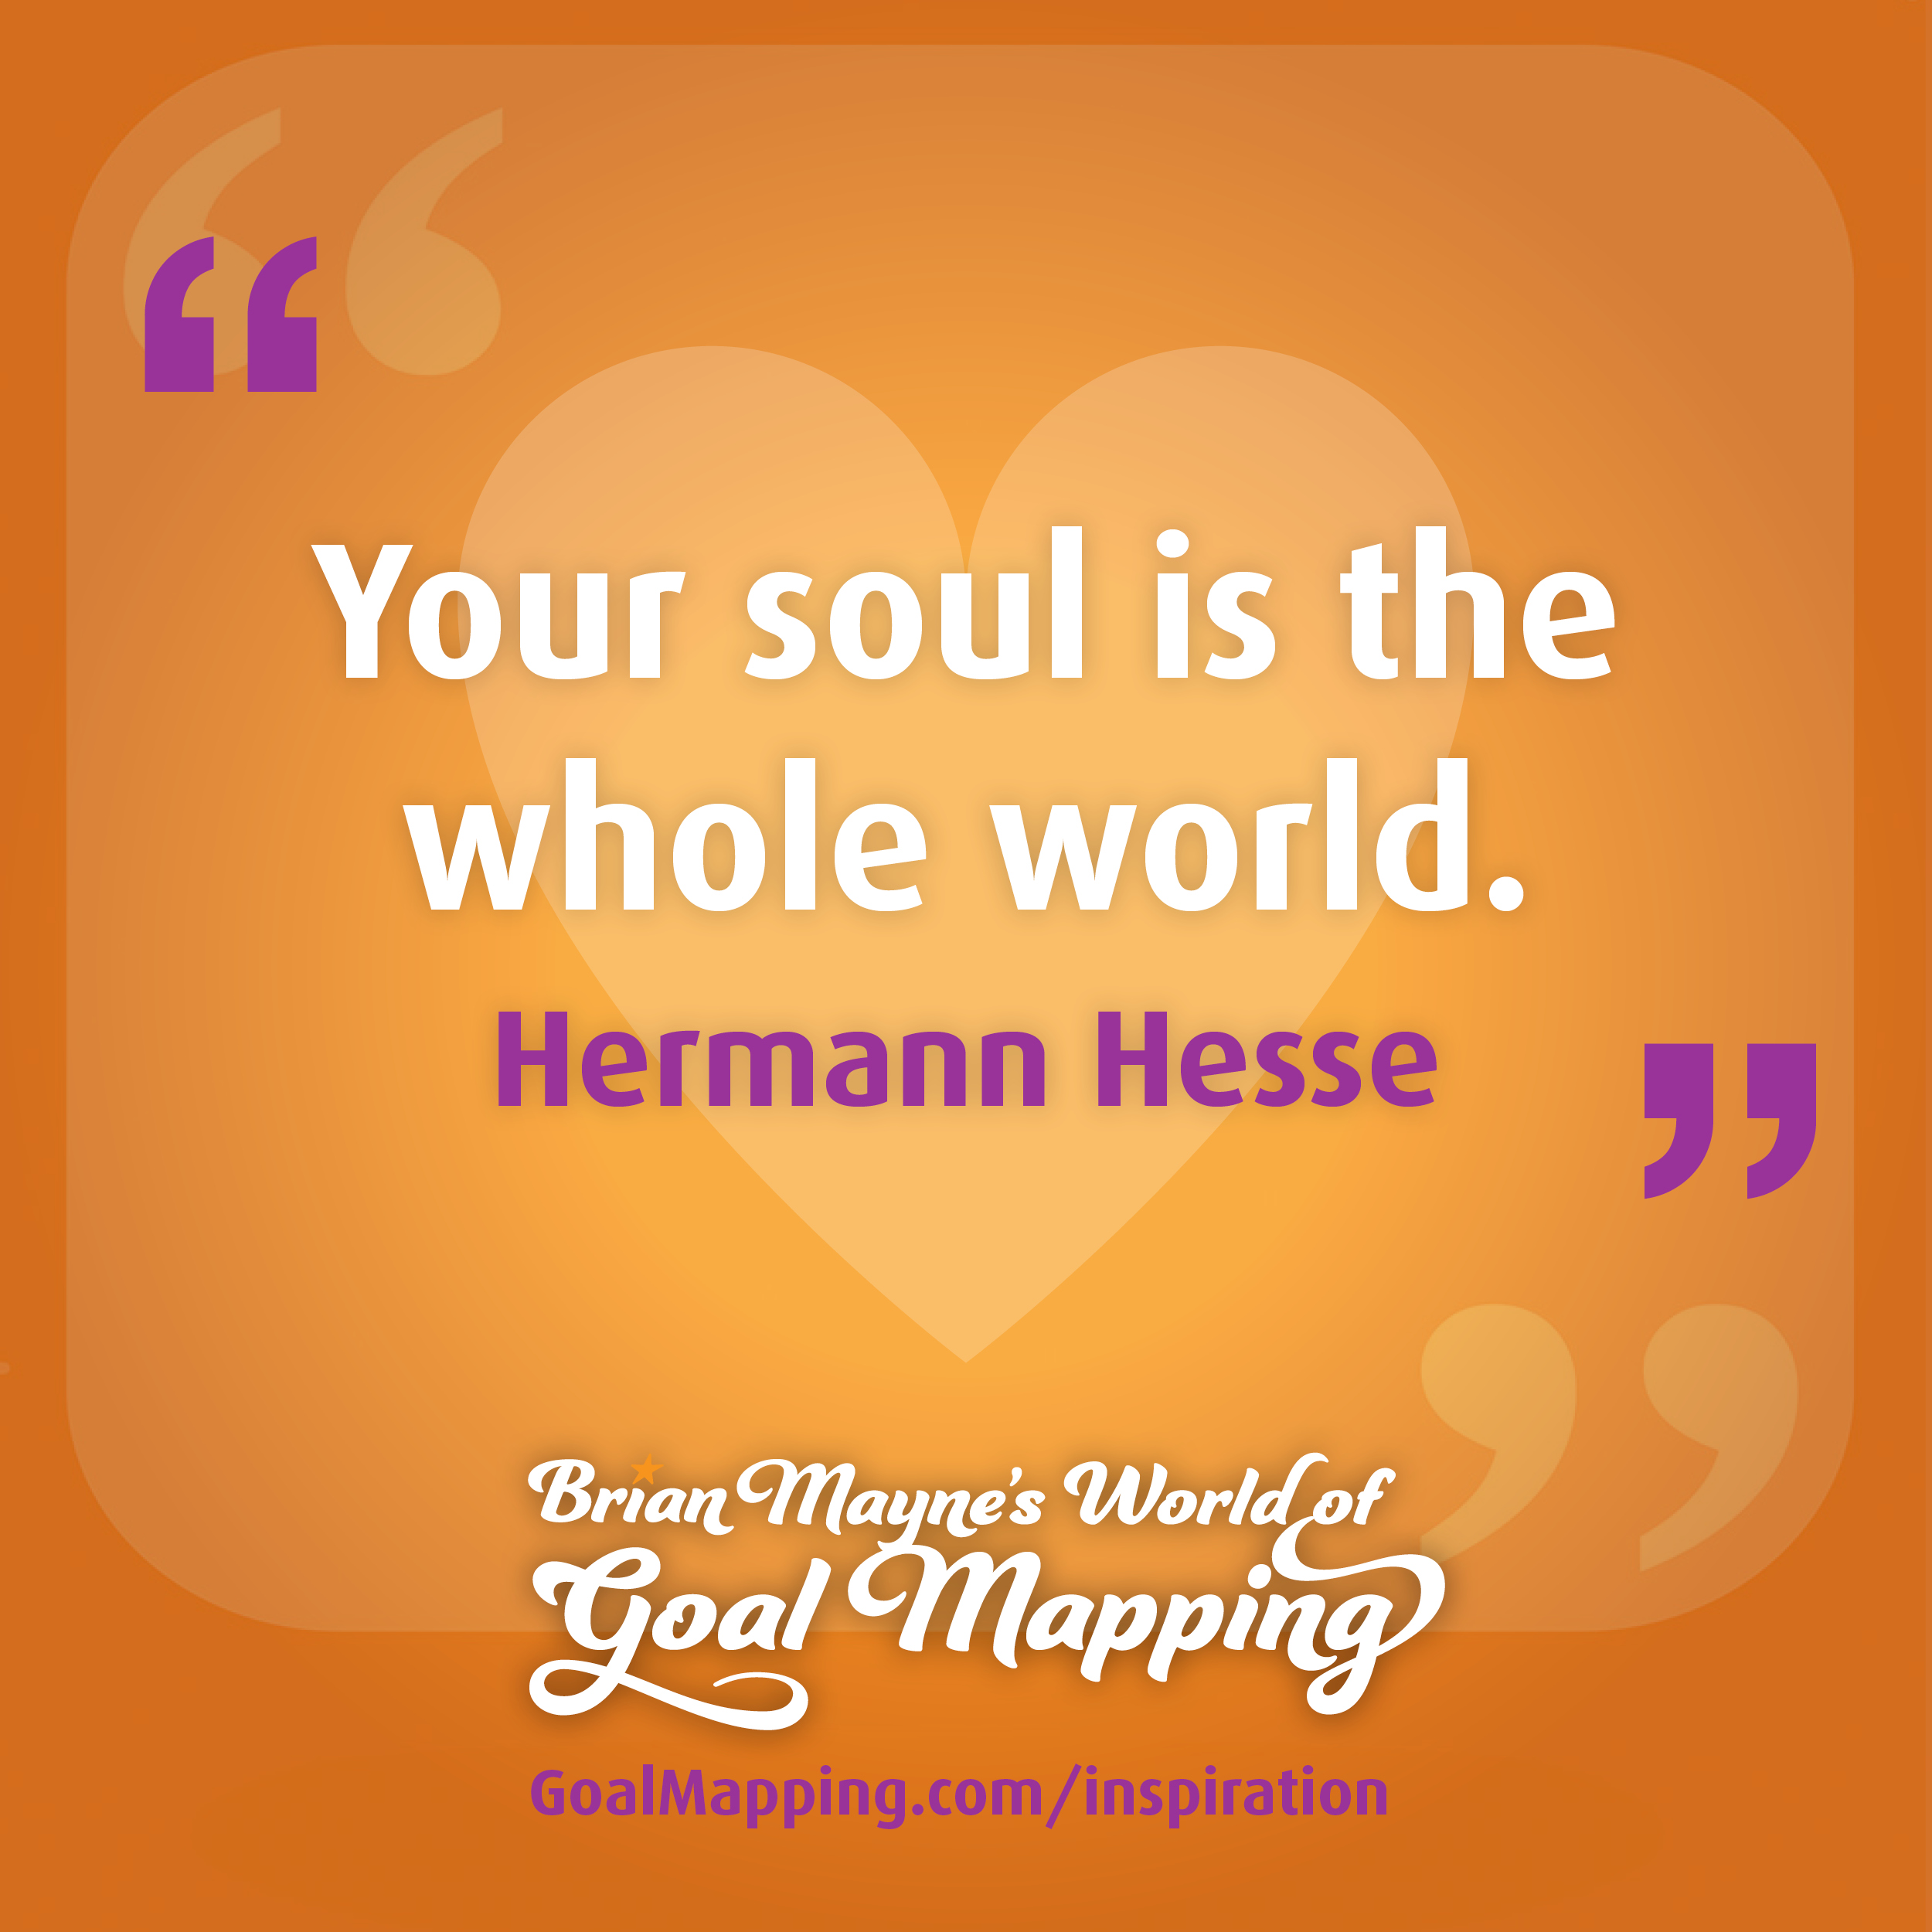 "Your soul is the whole world." Hermann Hesse